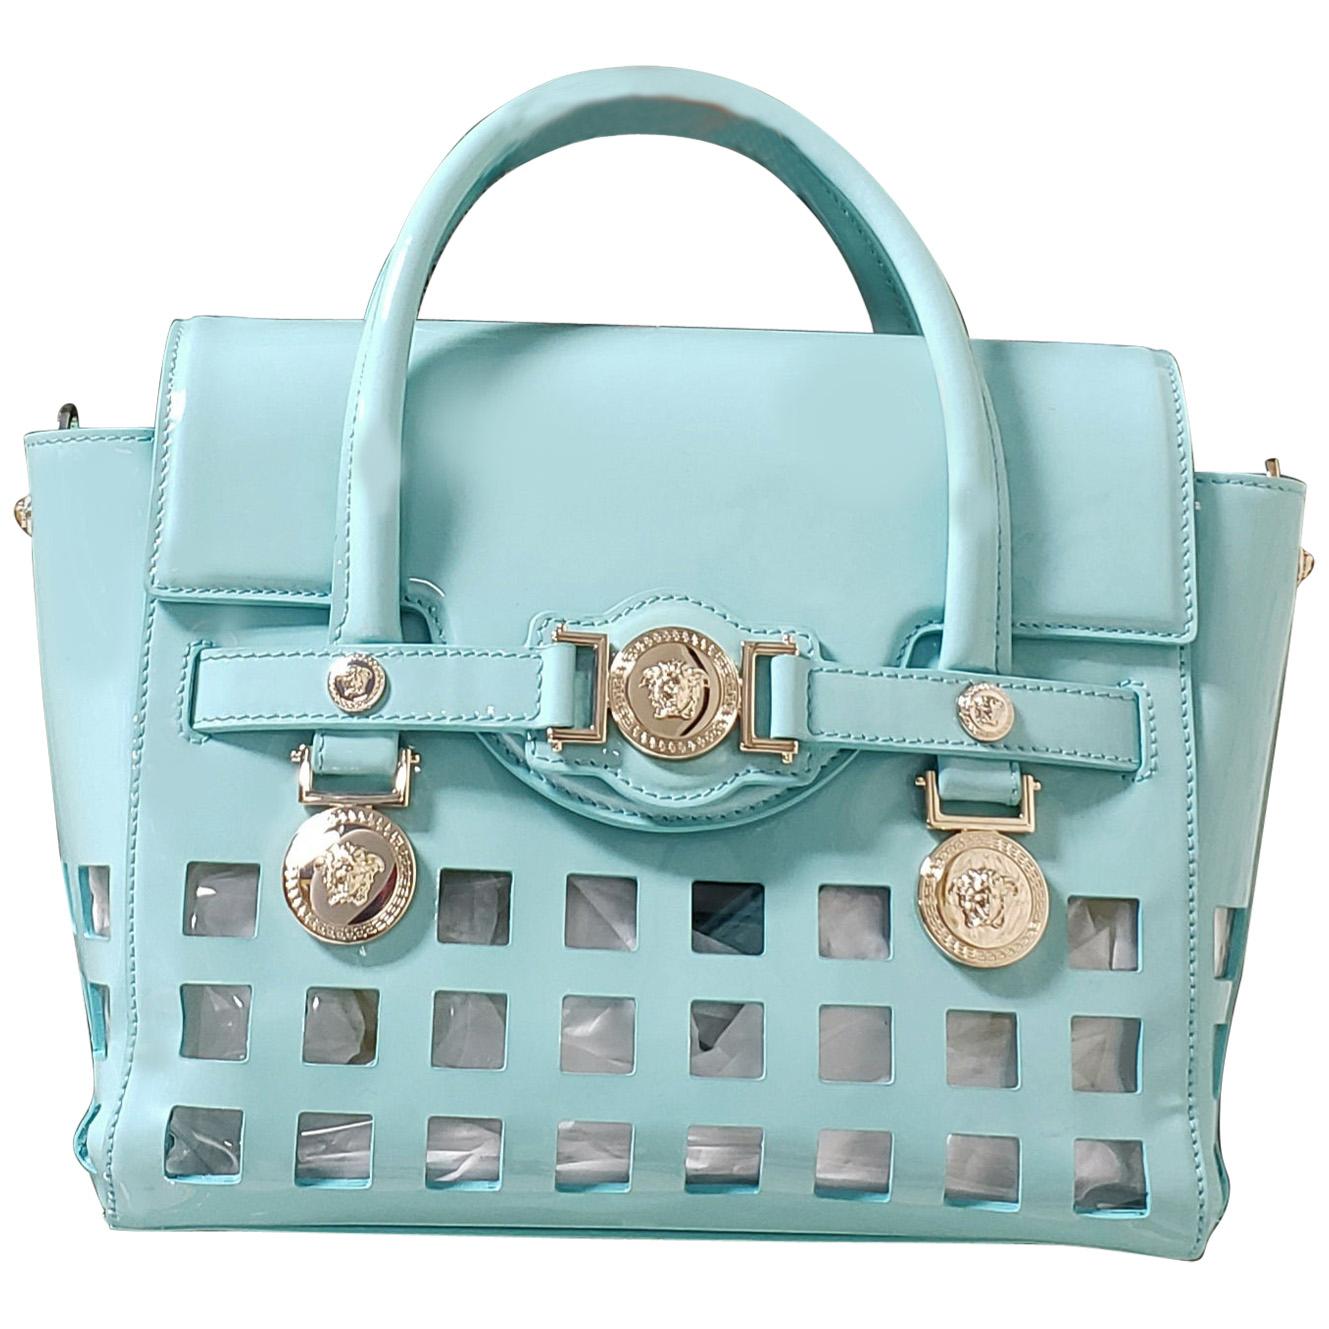 S/S 2015 look # 9 VERSACE PERFORATED PATENT BLUE LEATHER BAG